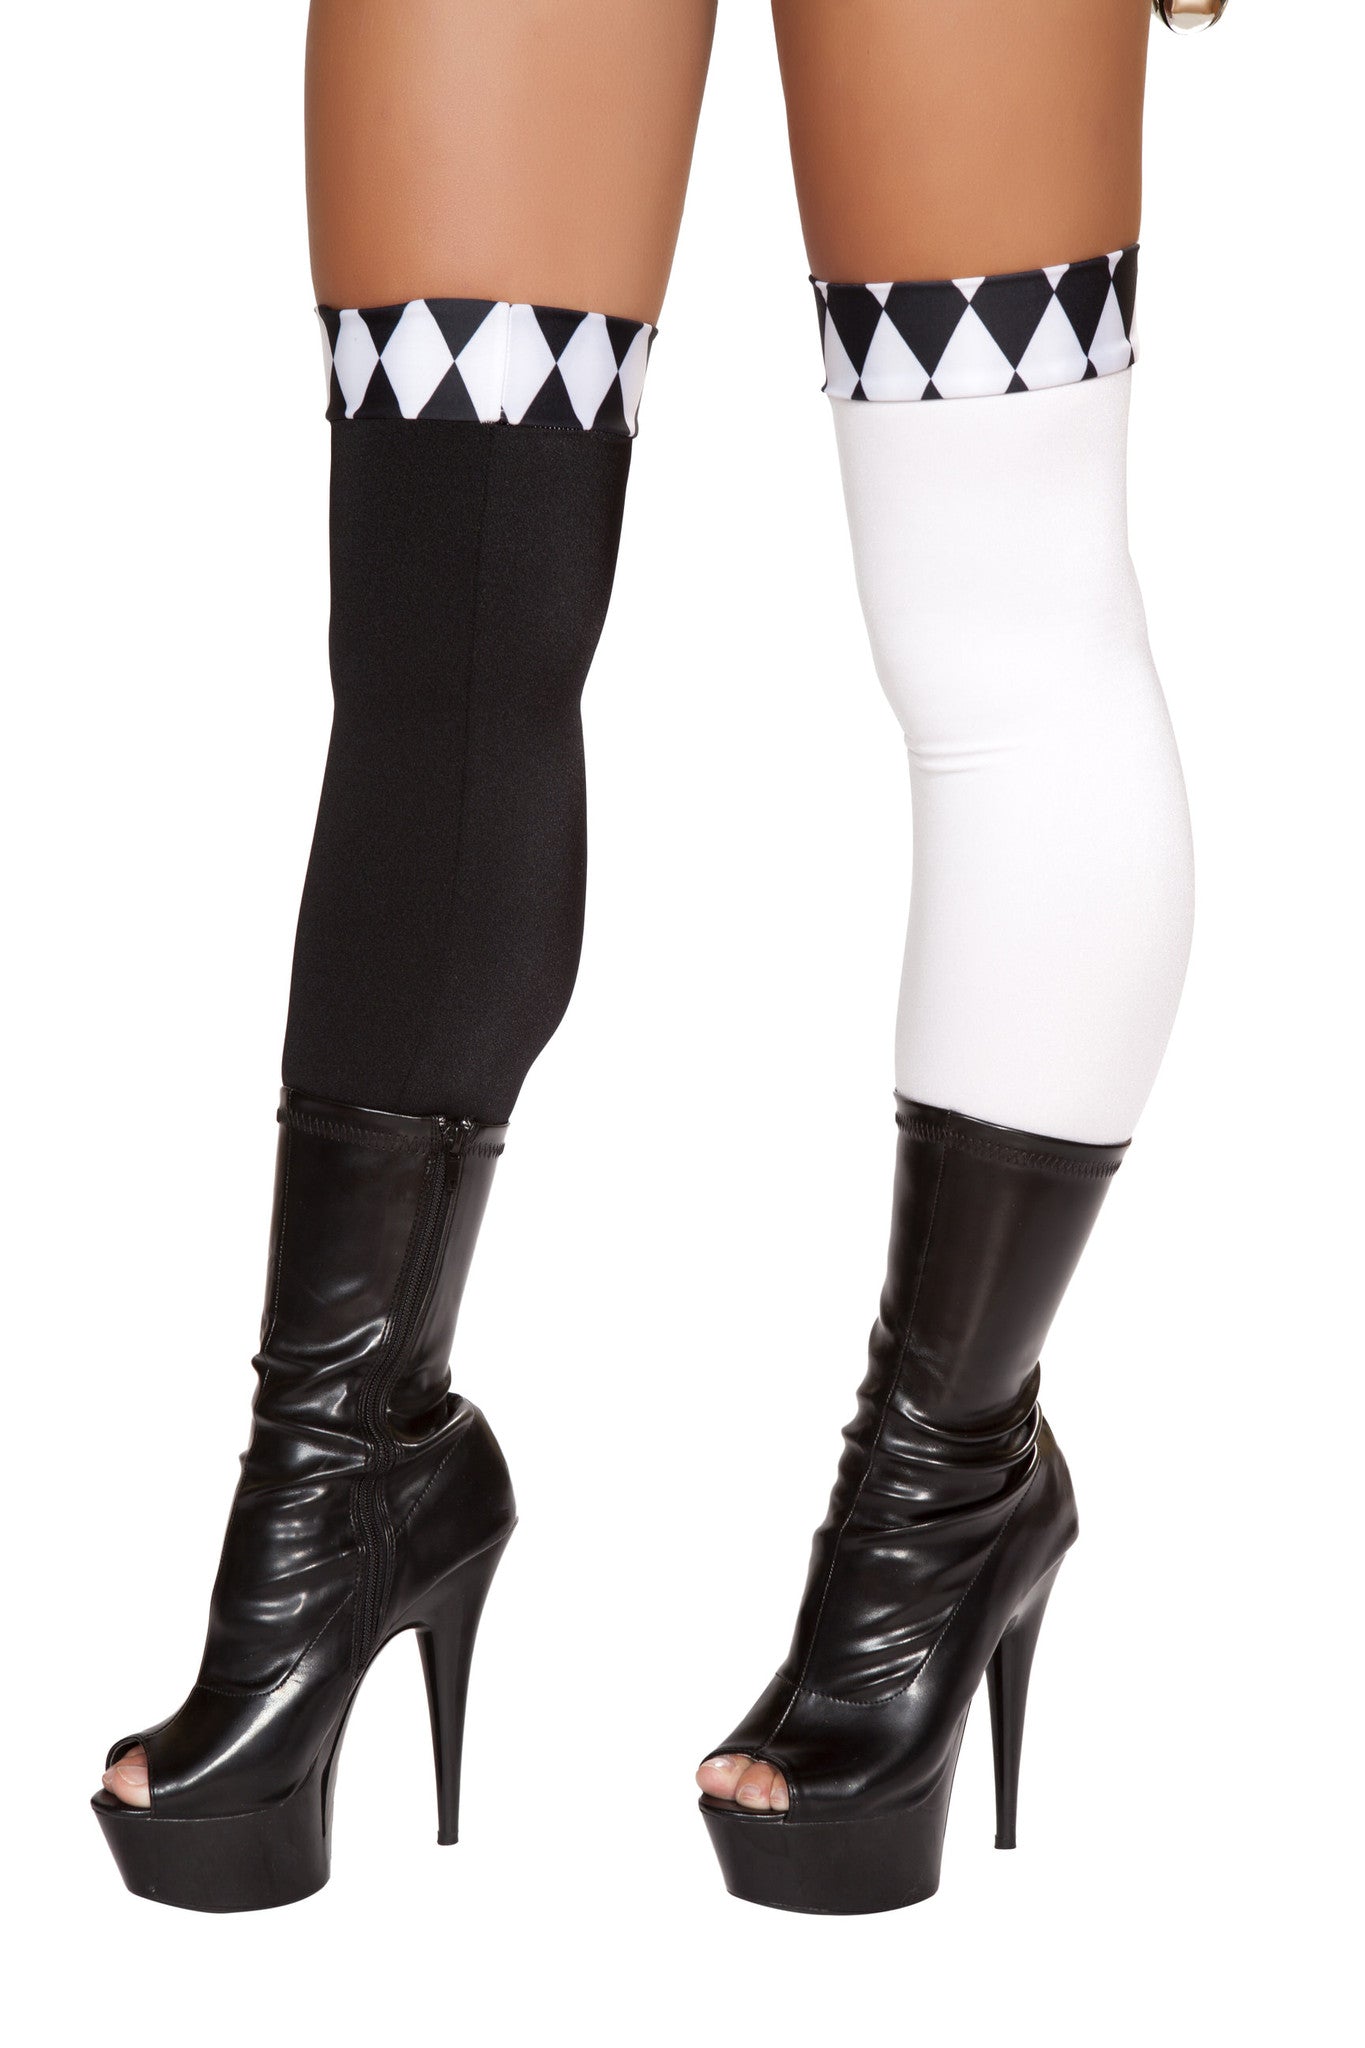 Black and White Wicked Jester Stockings